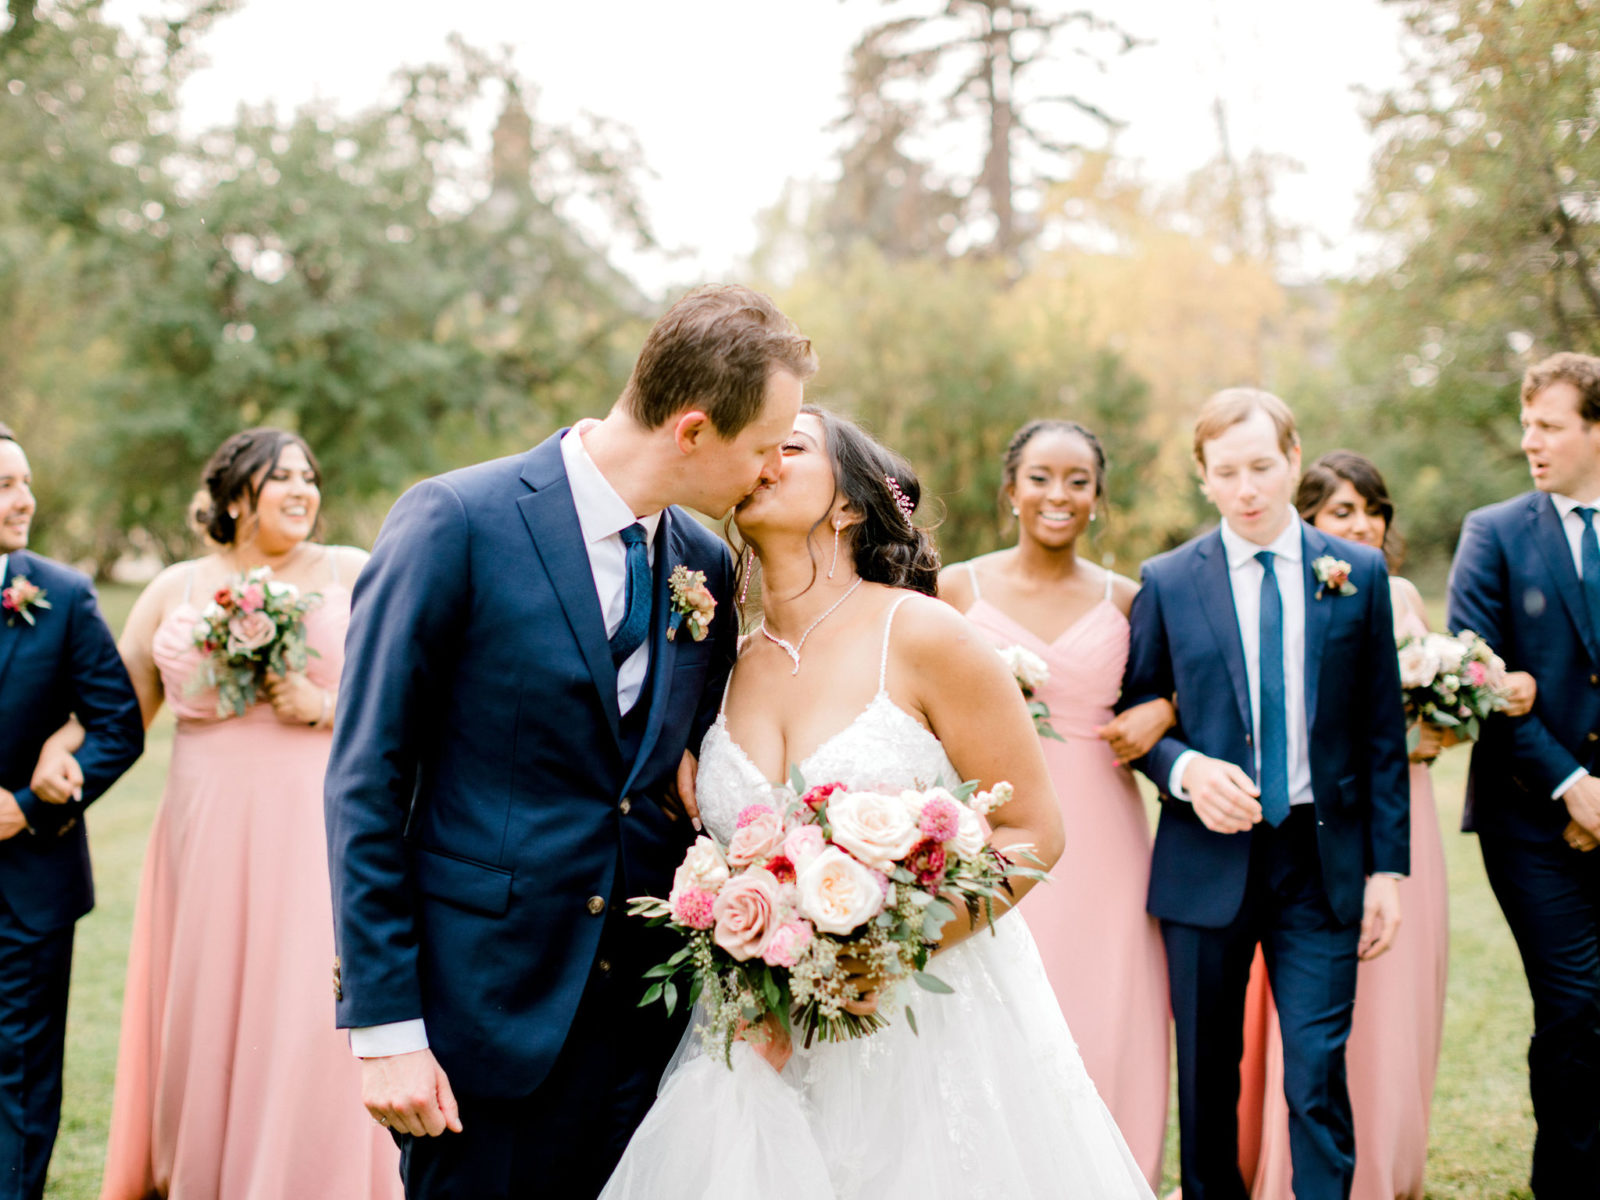 Summer wedding palette inspiration with navy and blush wedding party attire